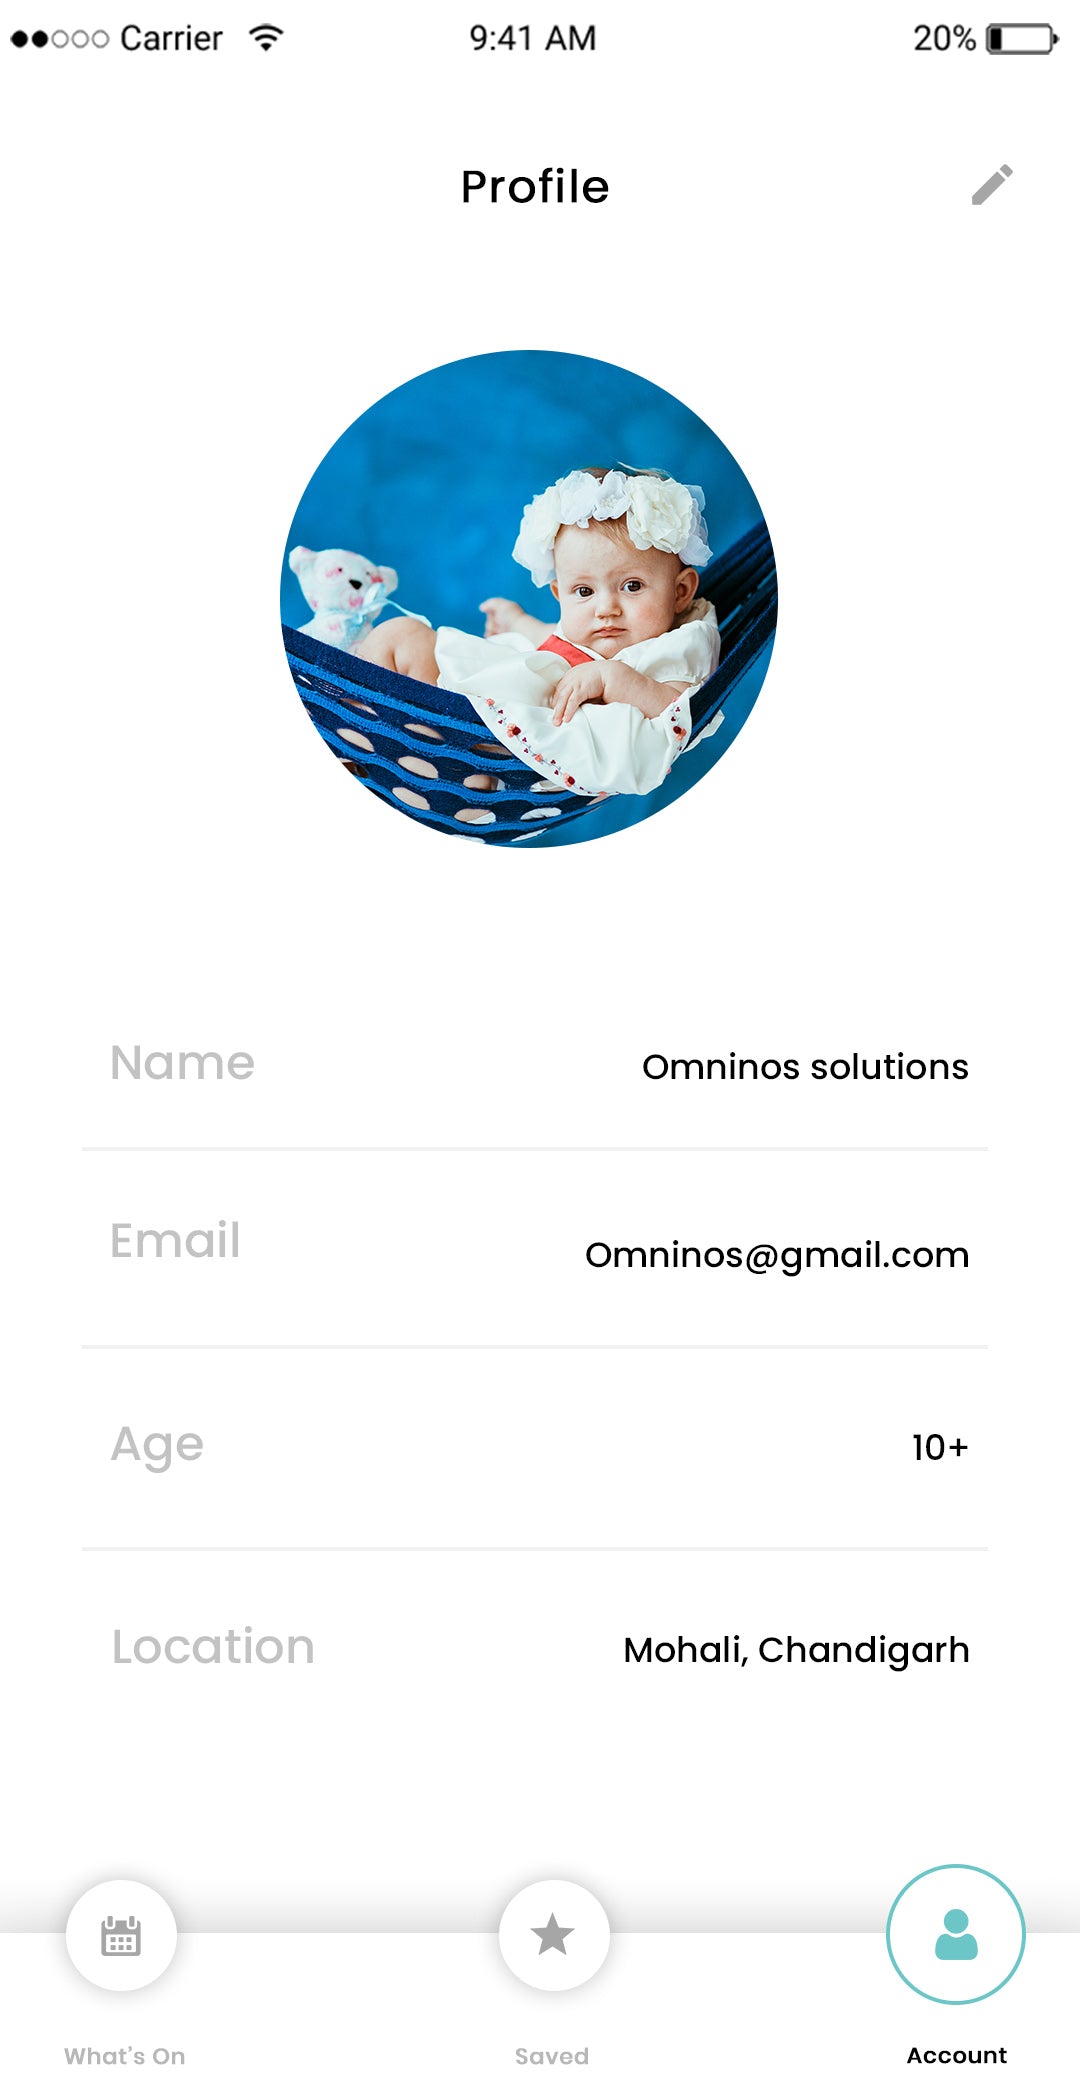 Event Staff Clone App Script: Make Your Events With Omninos Clone App, Profile Screen